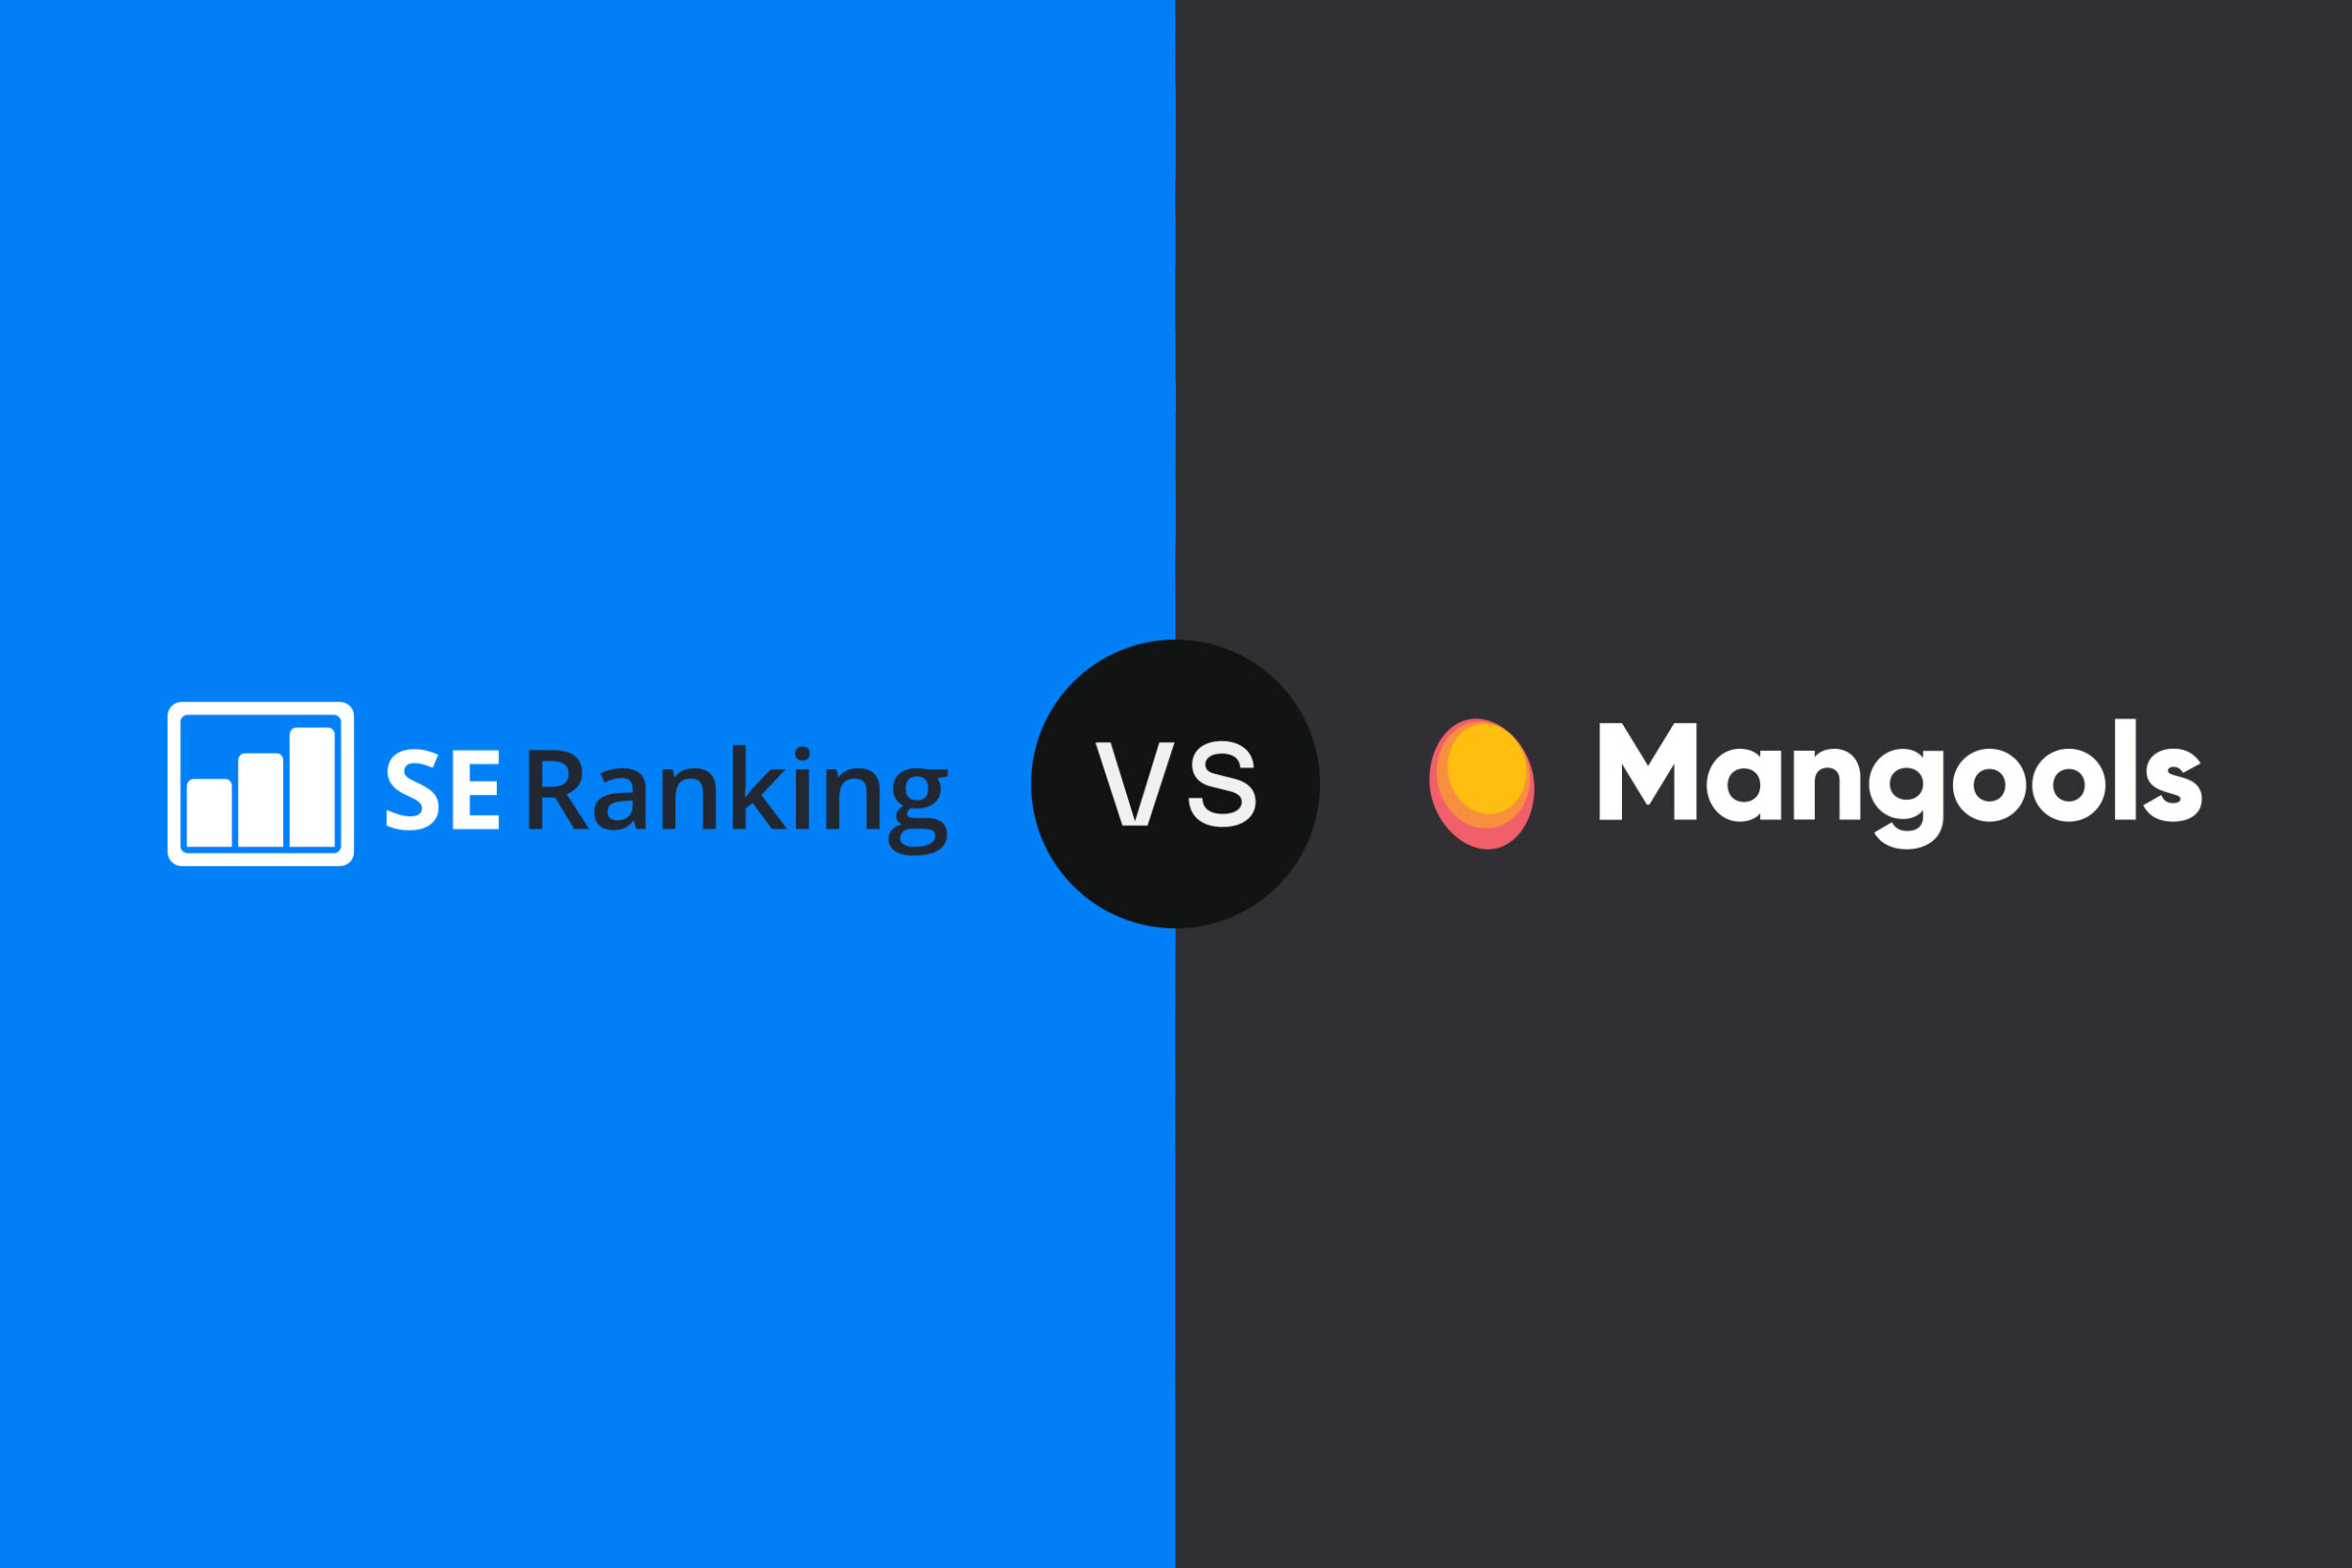 Image comparing SE Ranking and Mangools against each other